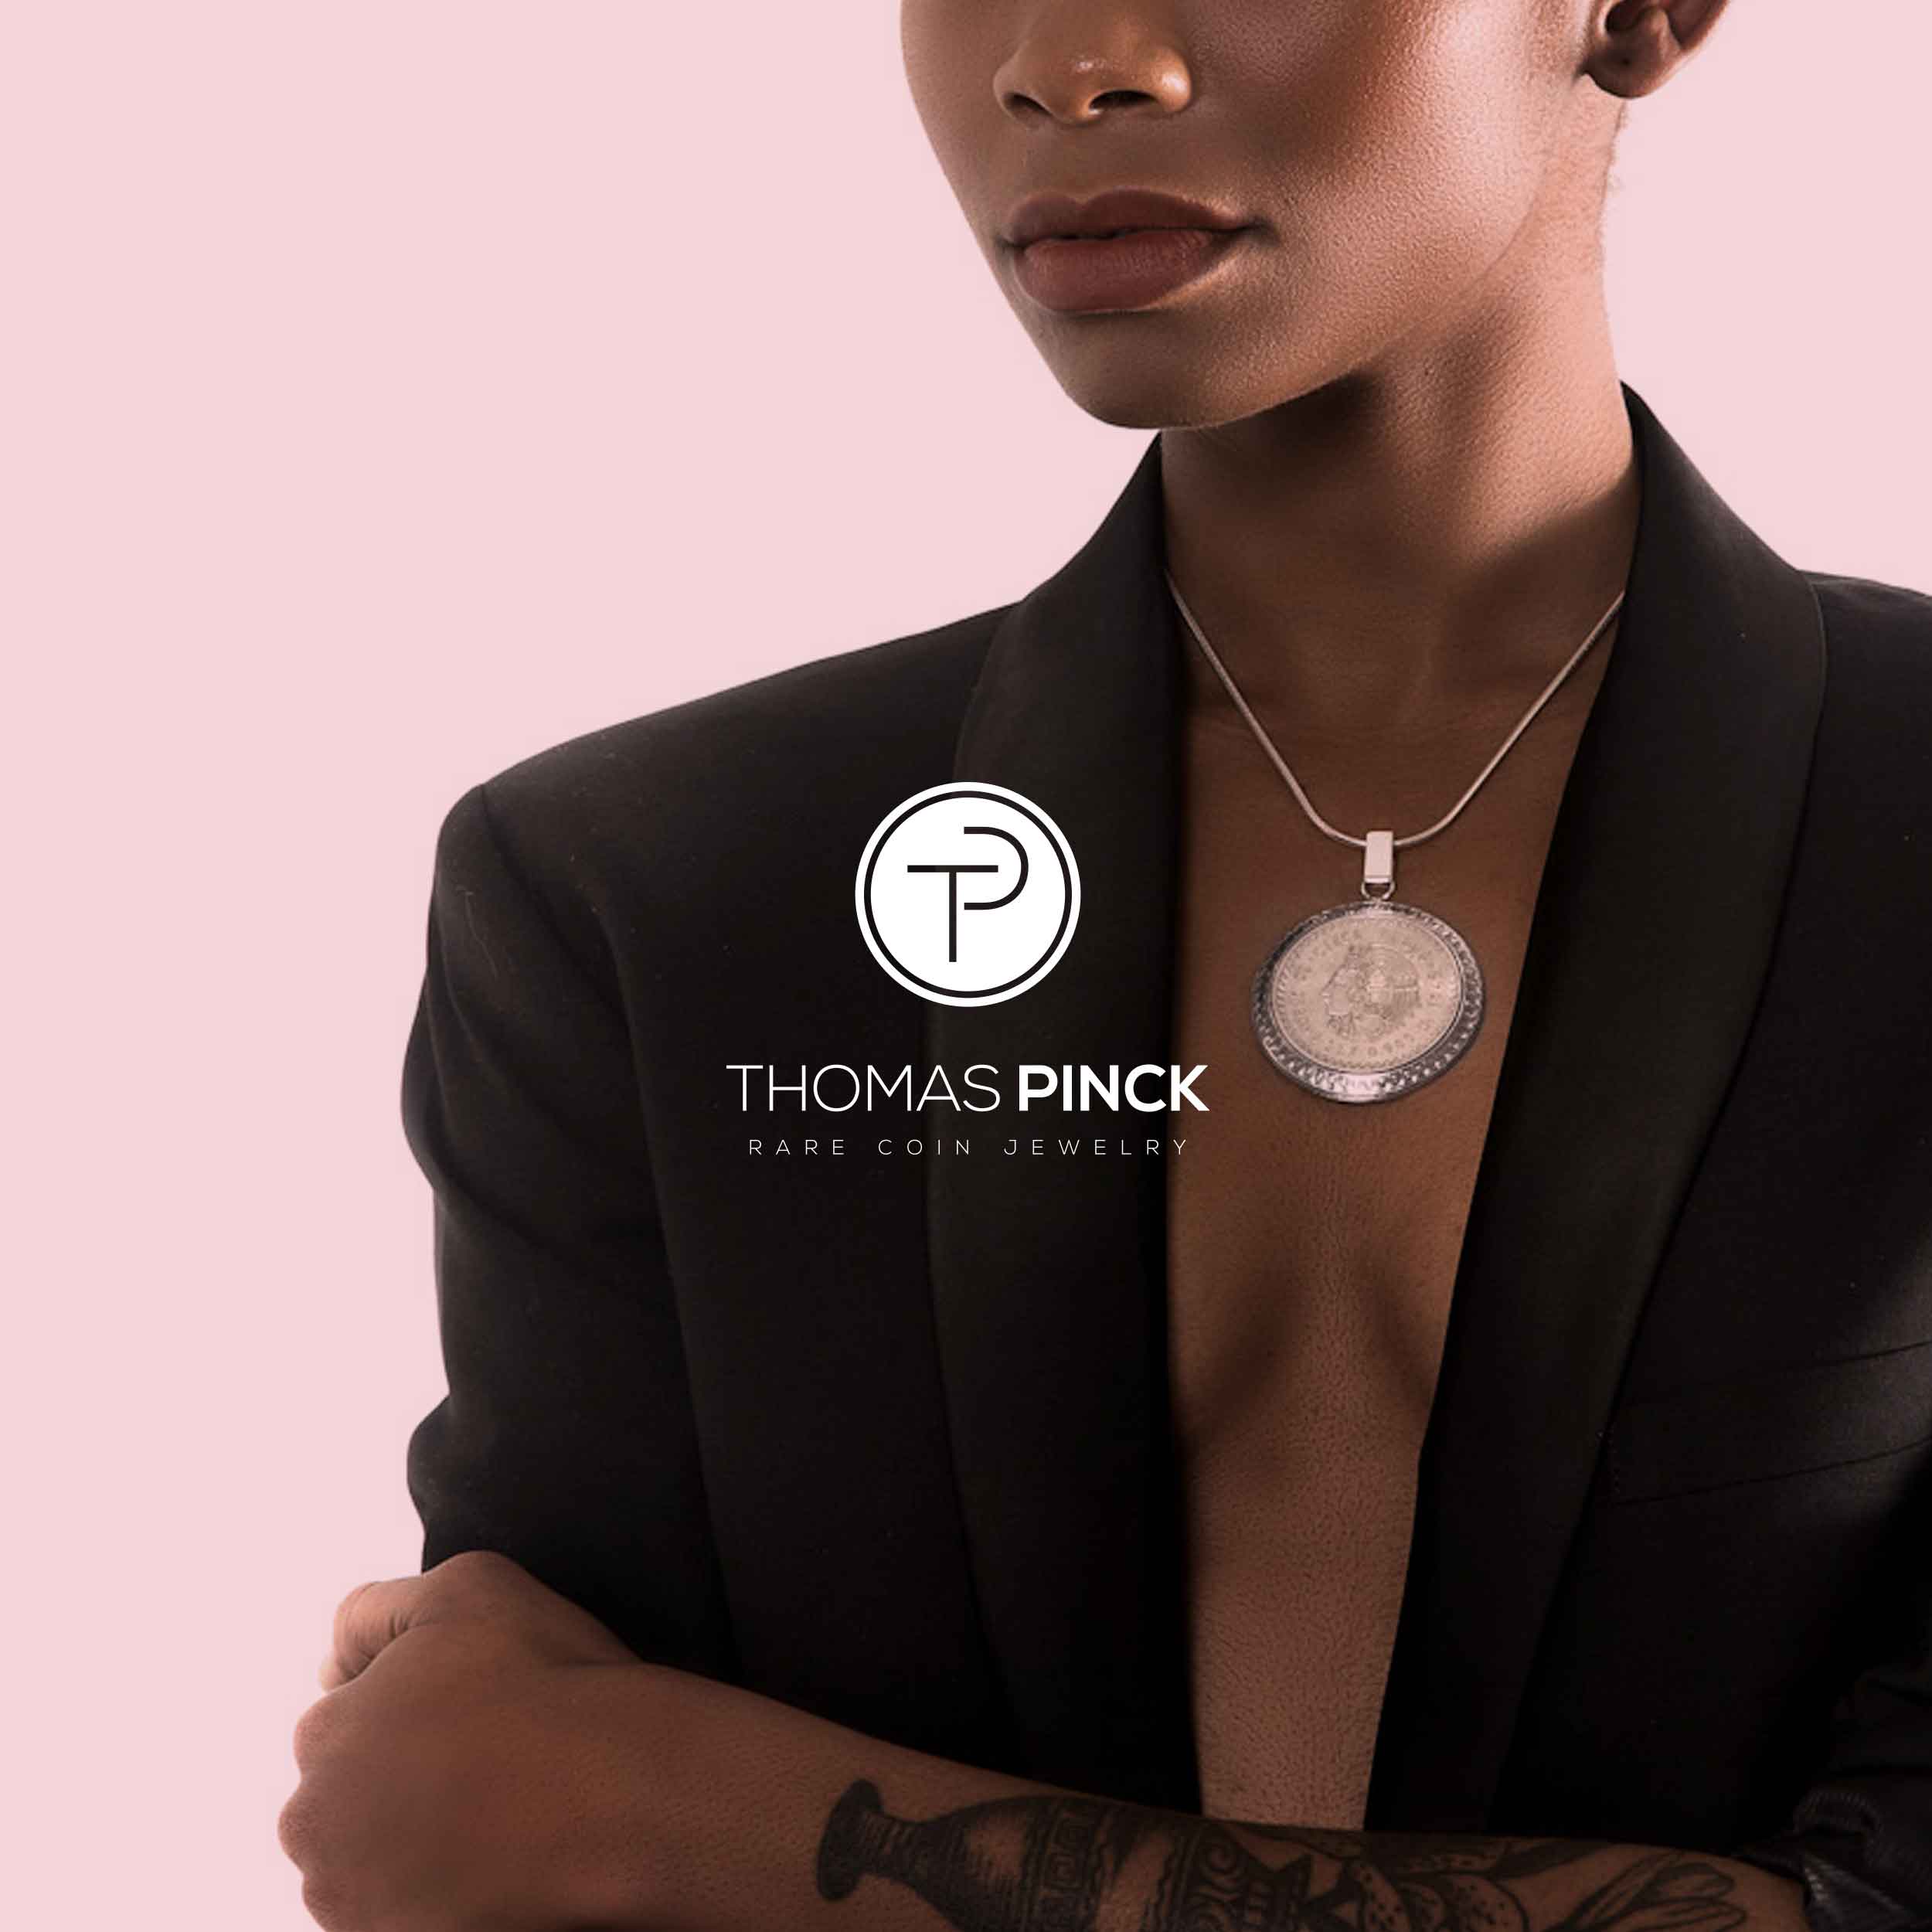 An African American model wearing a Thomas Pinck rare coin jewelry necklace. (Copy)